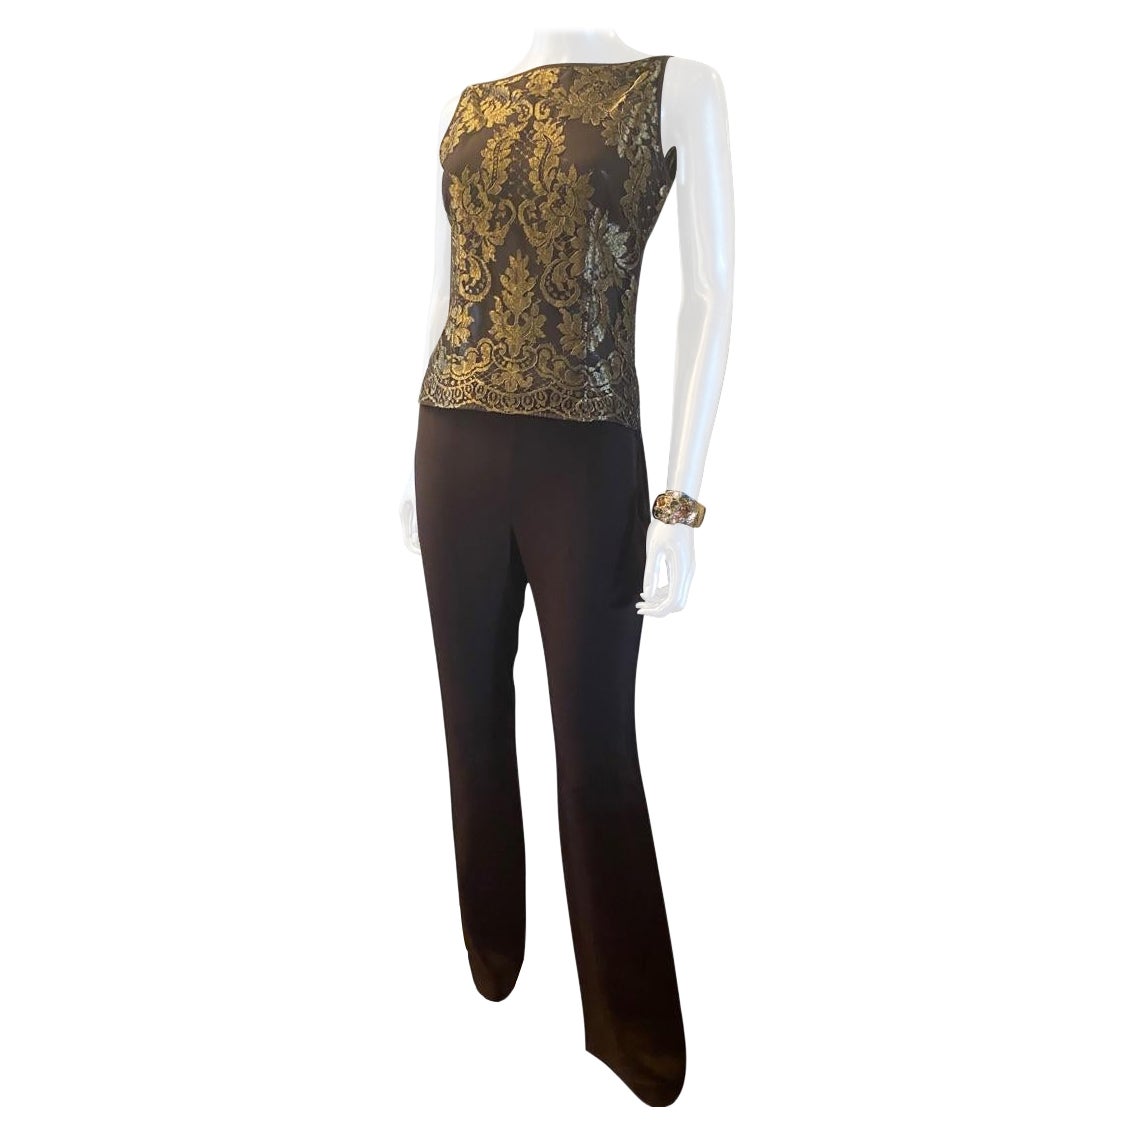 Black Valentino Italy Chocolate & Metallic Gold Blouse and Trouser Set Size 6-8 For Sale